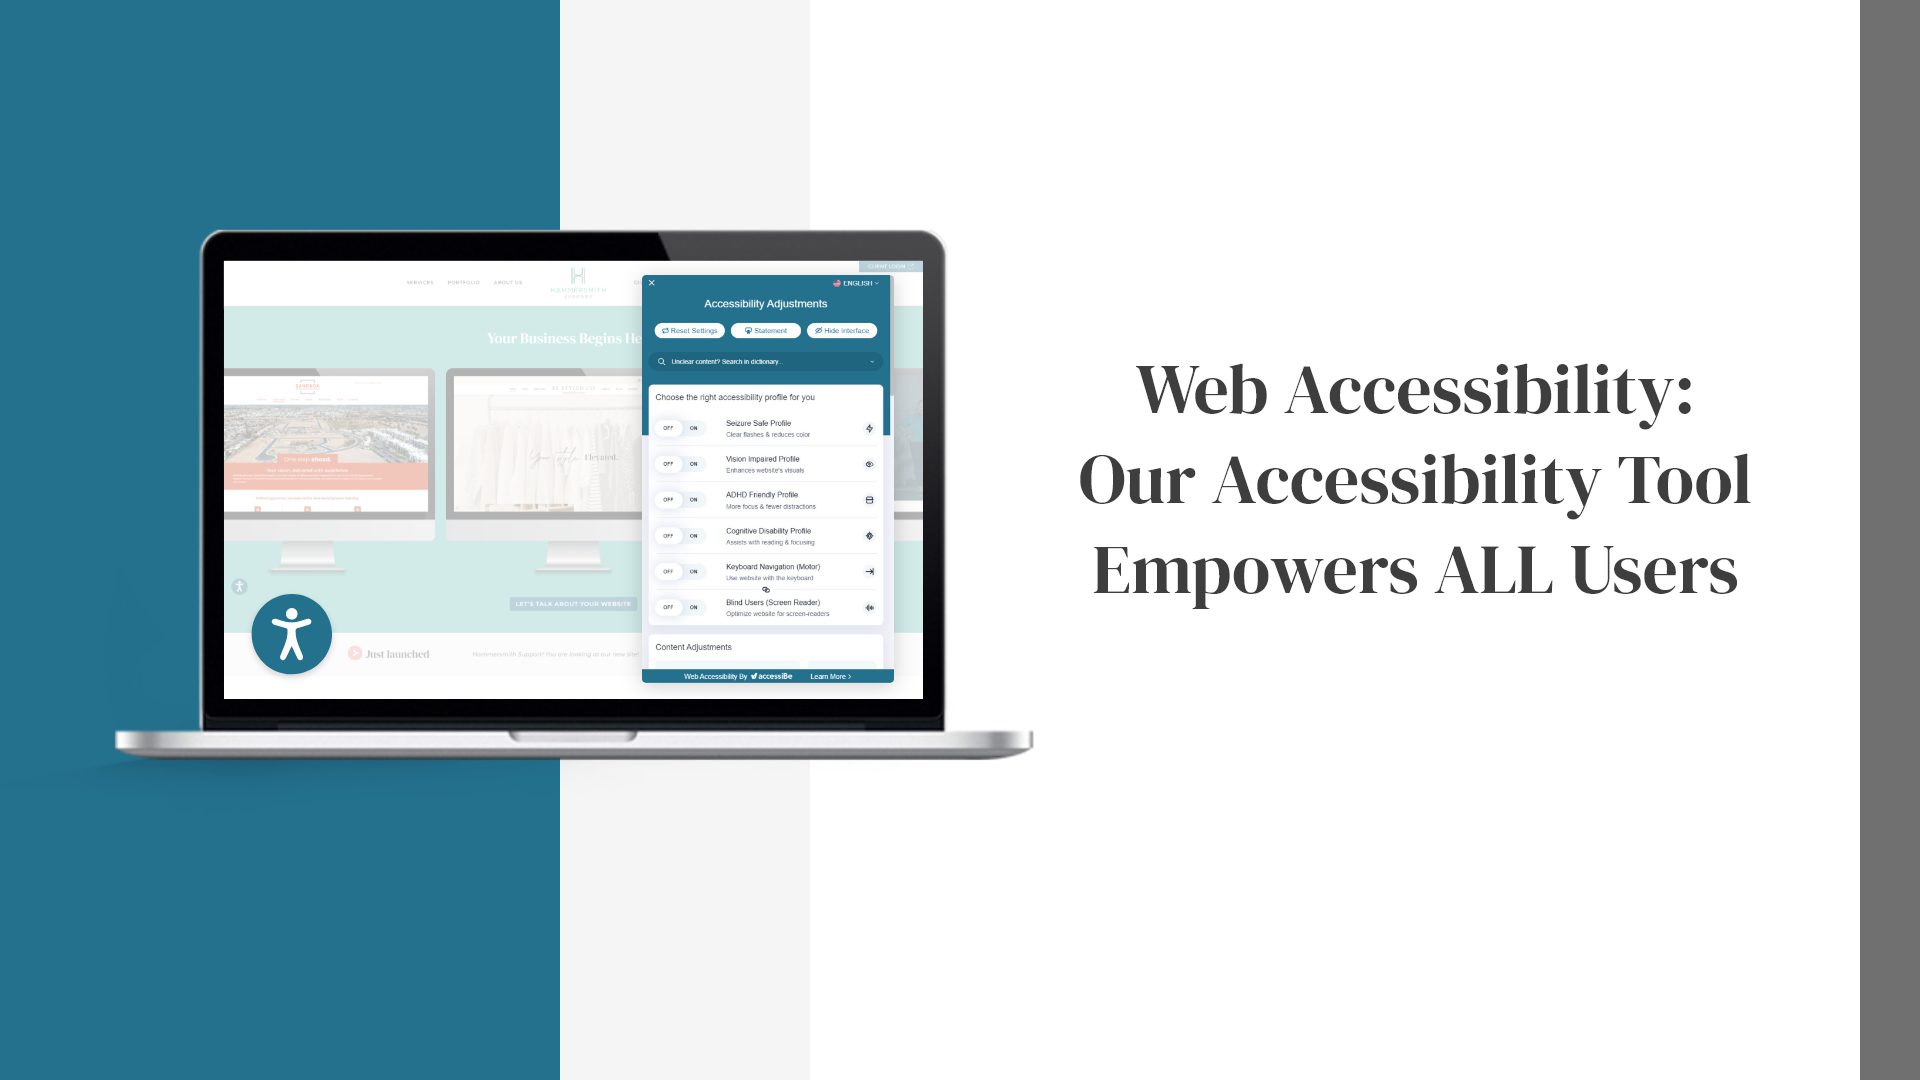 Web Accessibility: Our Accessibility Tool Empowers ALL Users